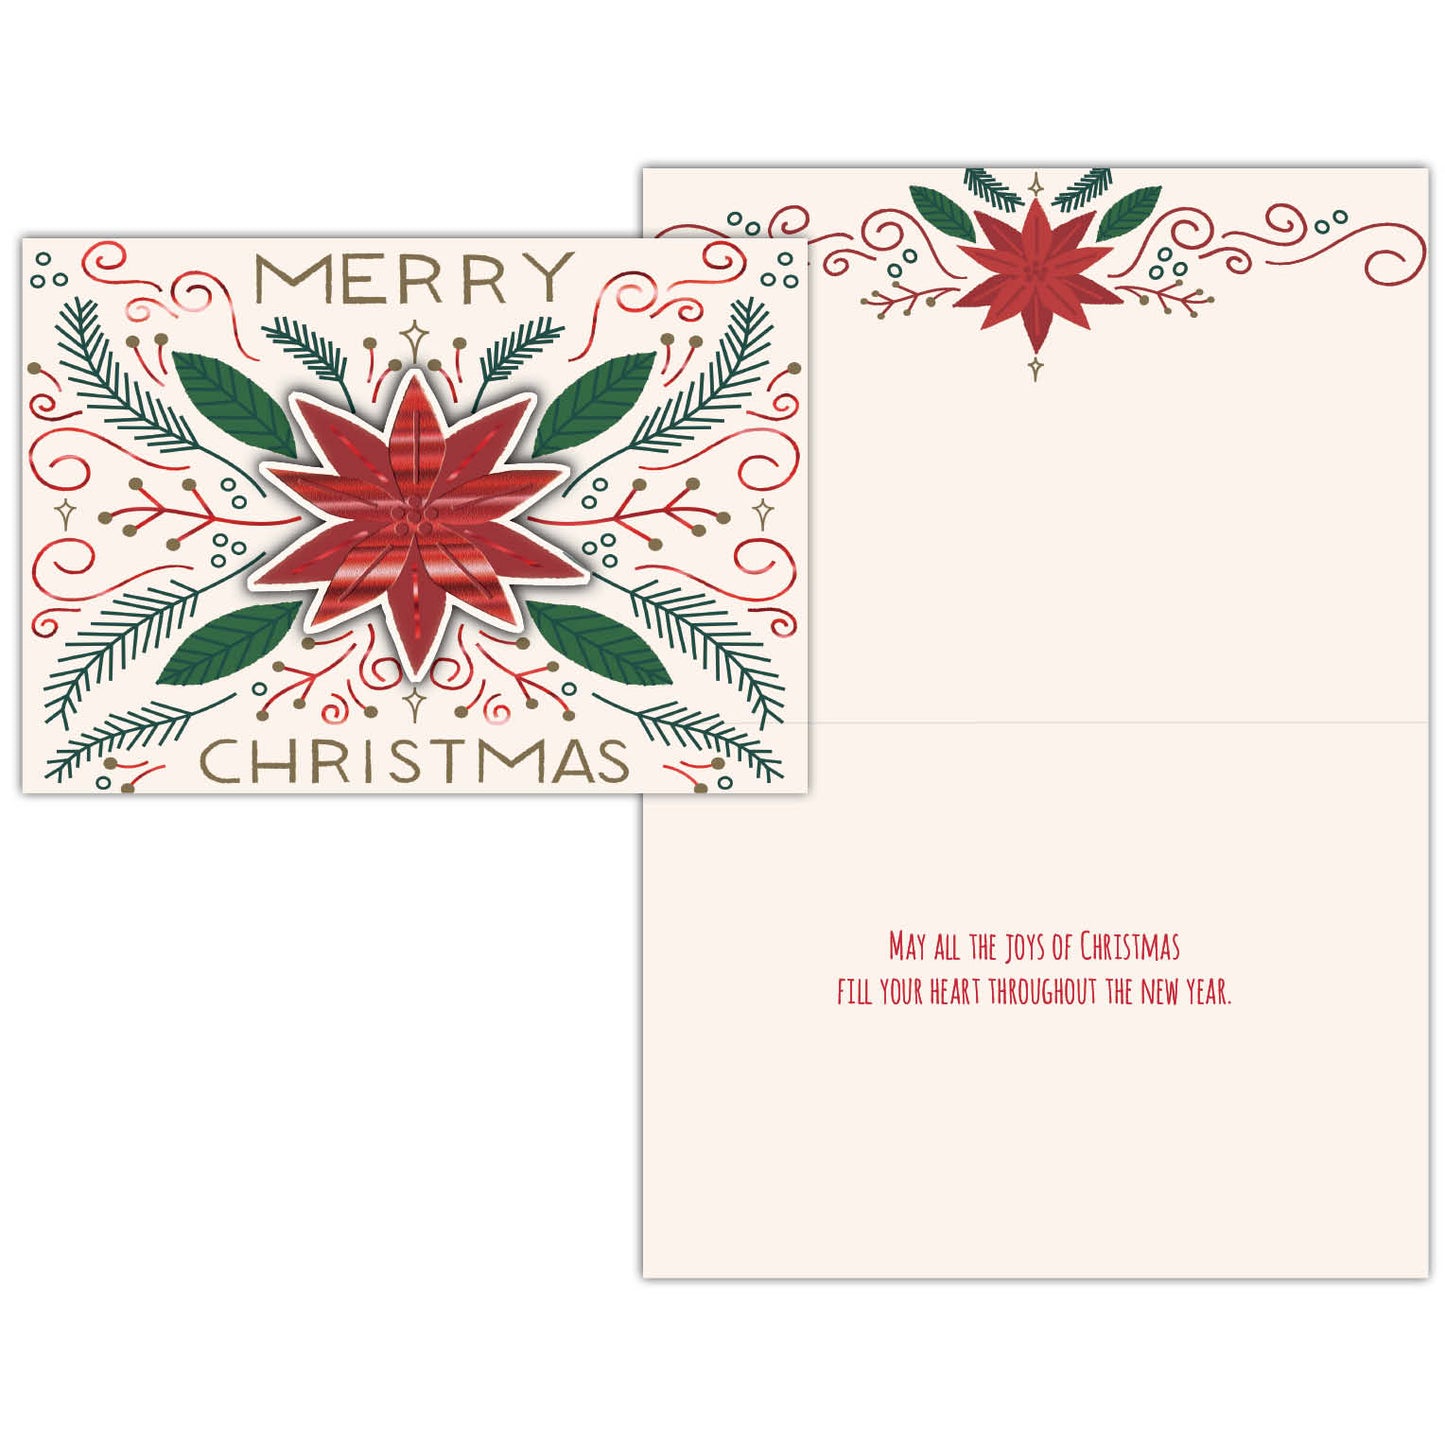 Poinsetta - Boxed Christmas Cards -15 Cards & Envelopes